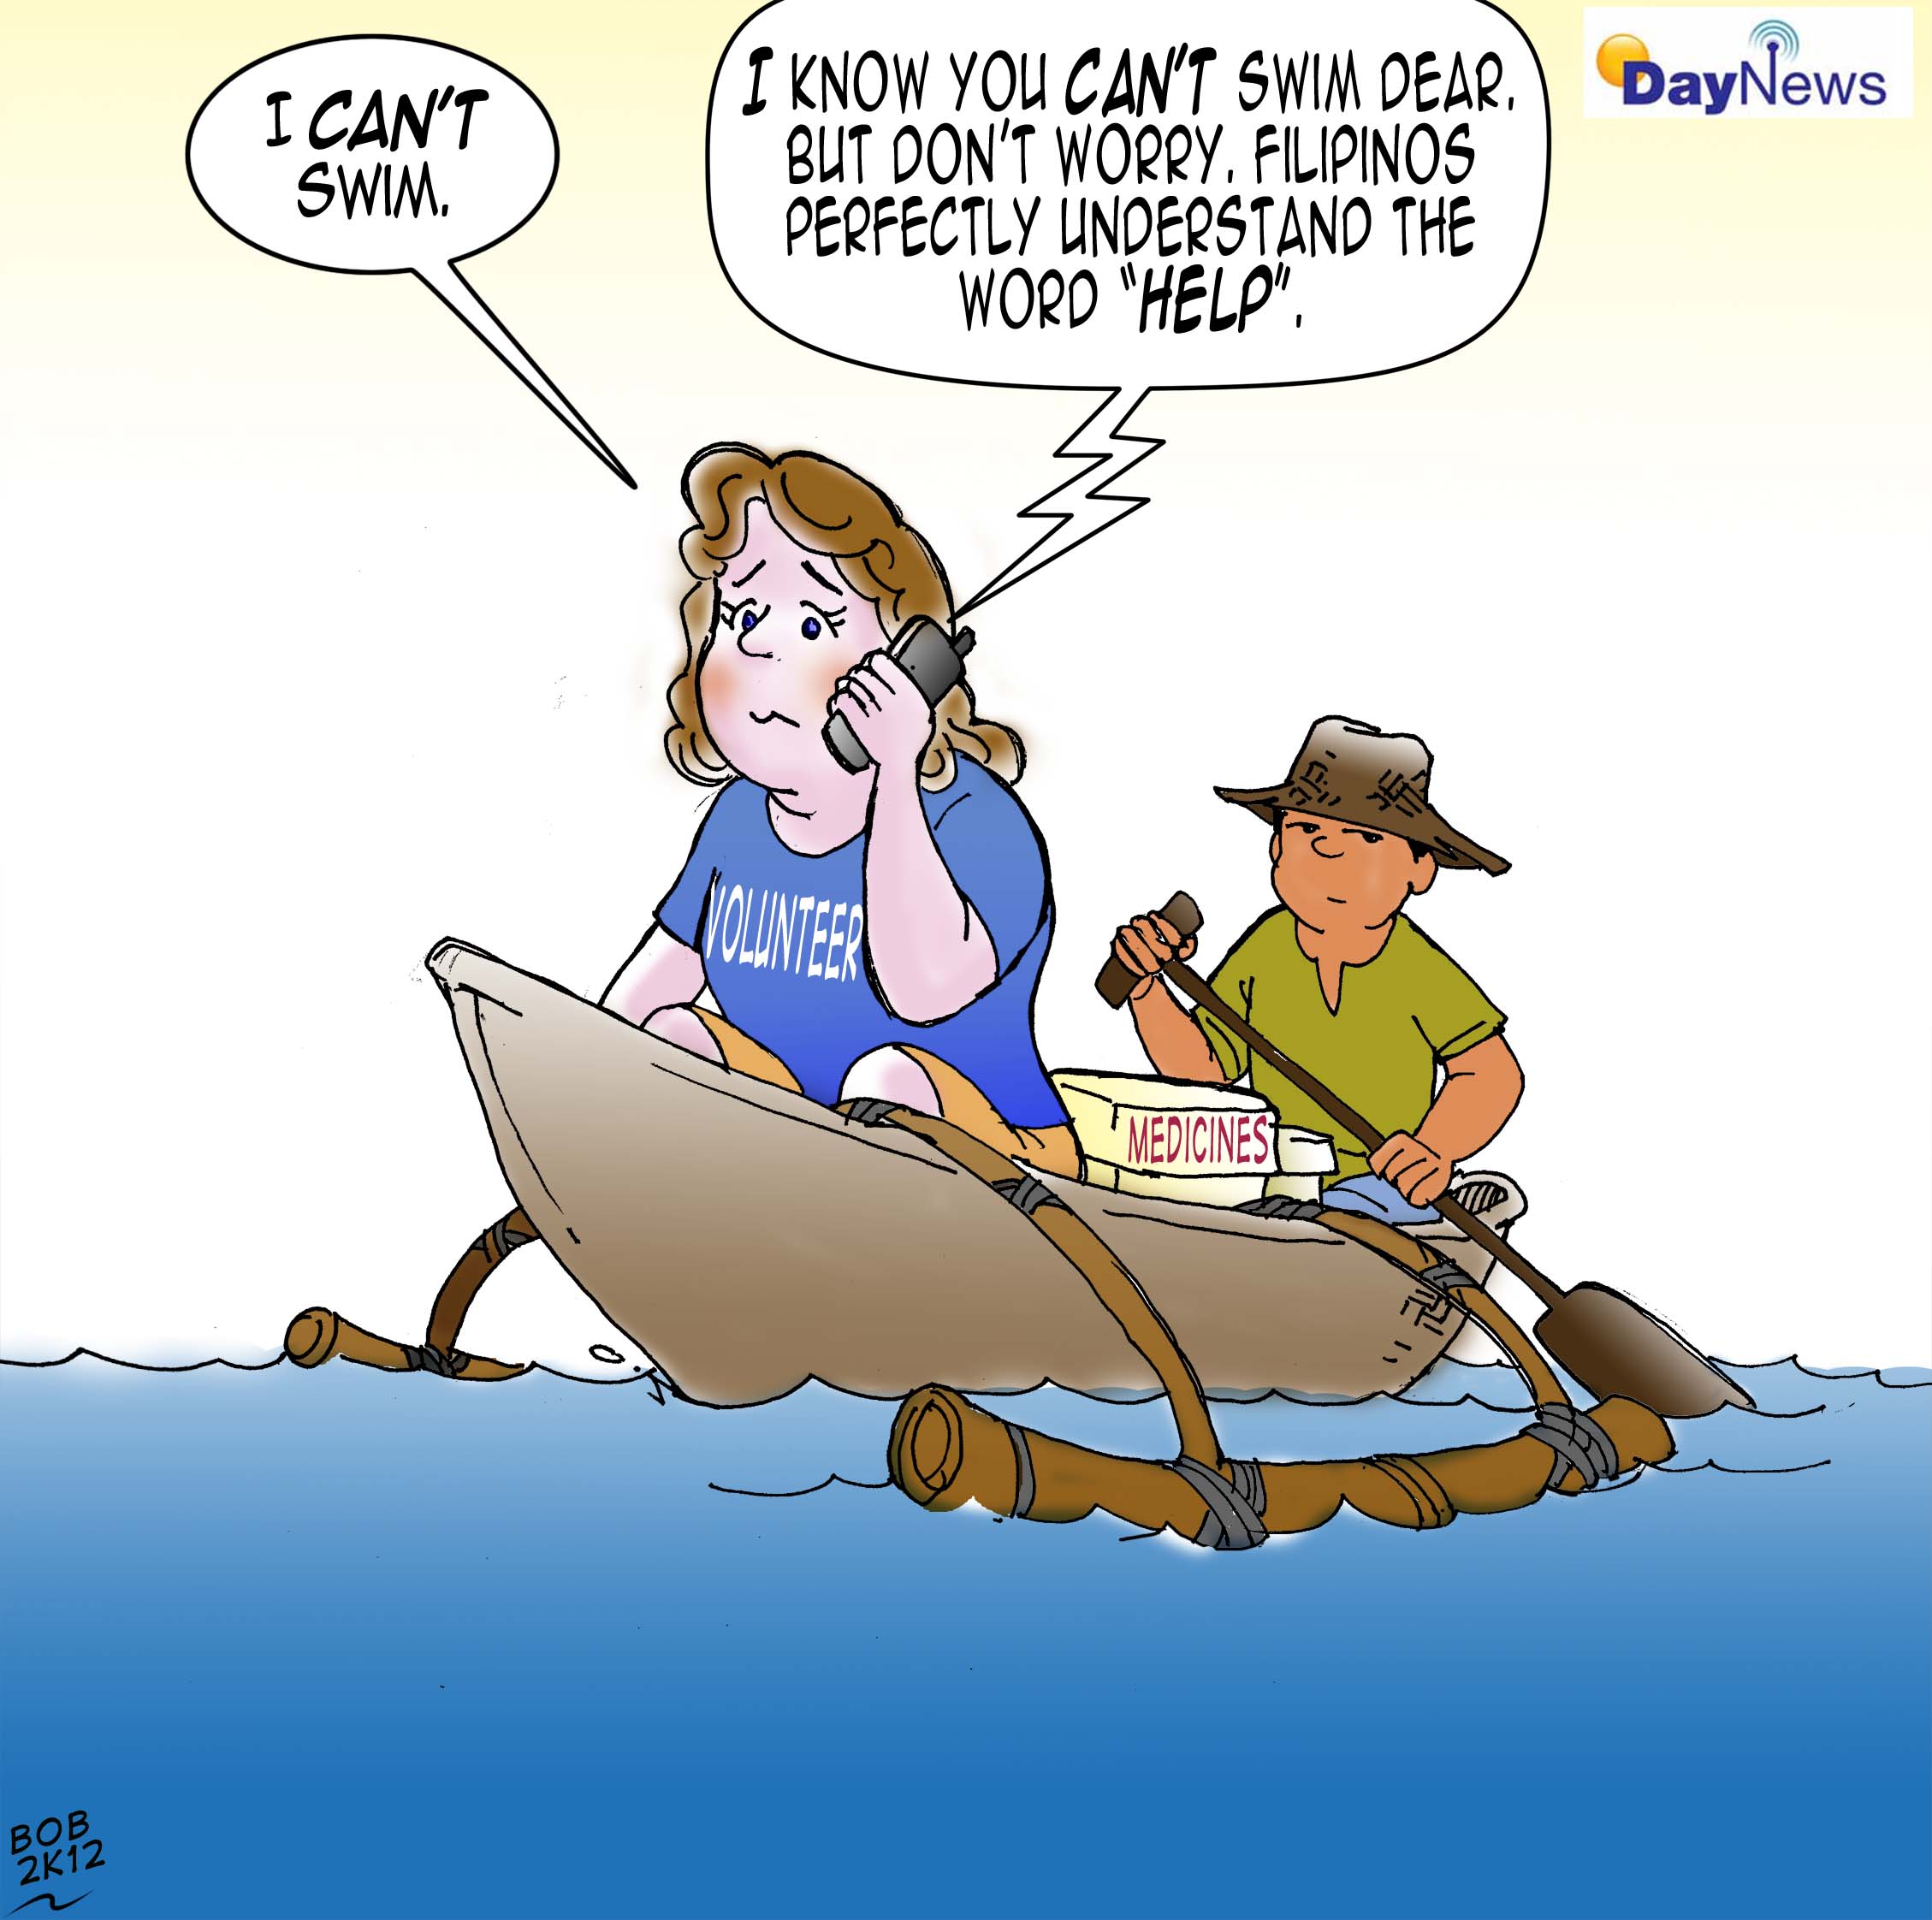 Help - Day News Cartoon Of The Day